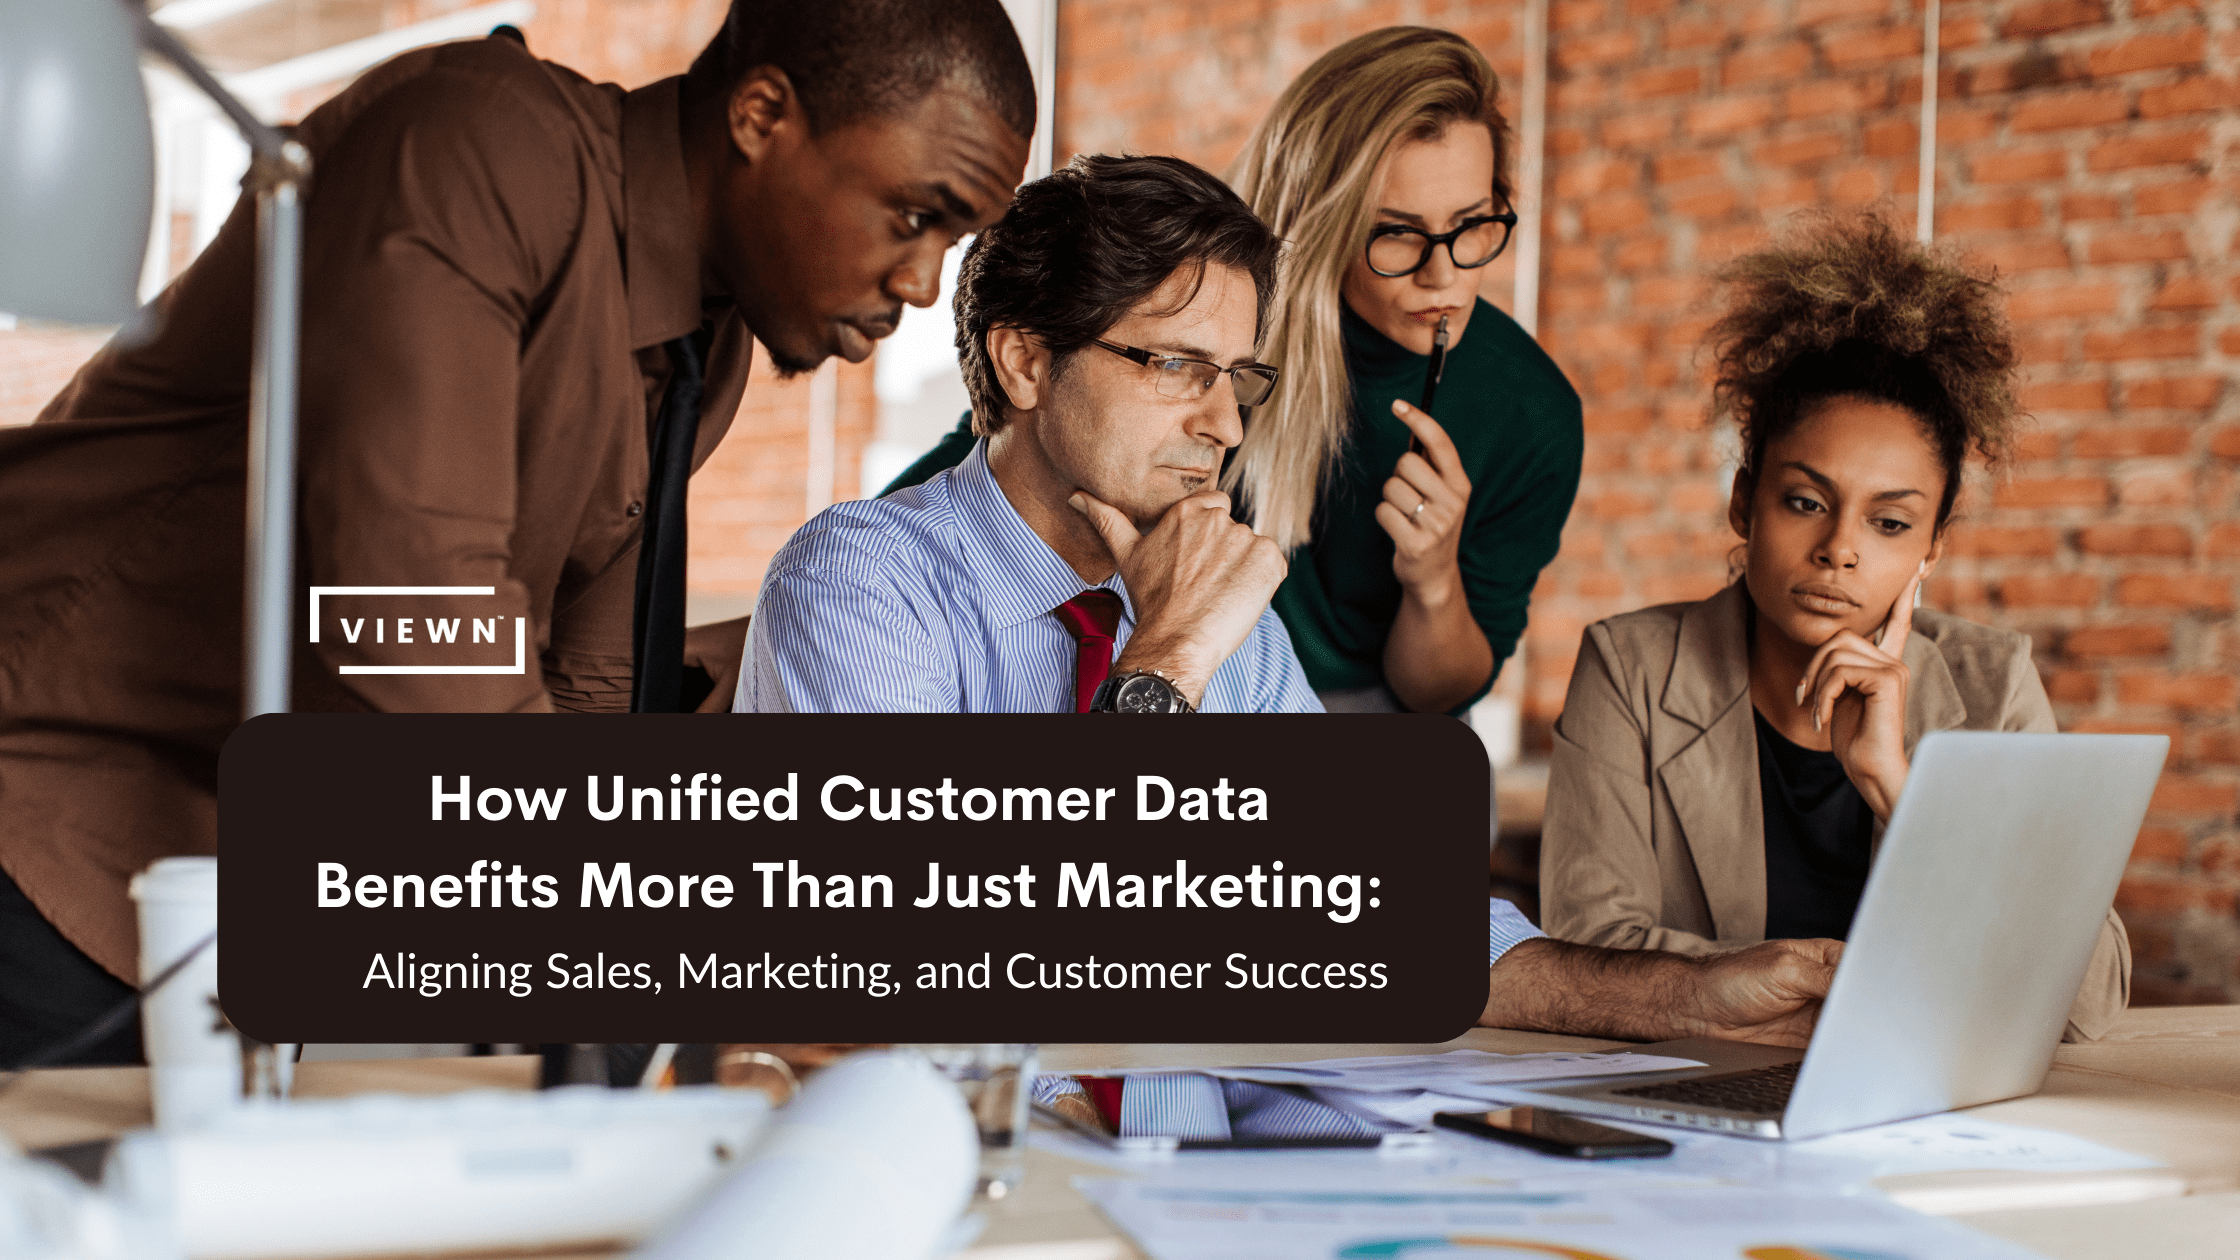 How Unified Customer Data Benefits More Than Just Marketing